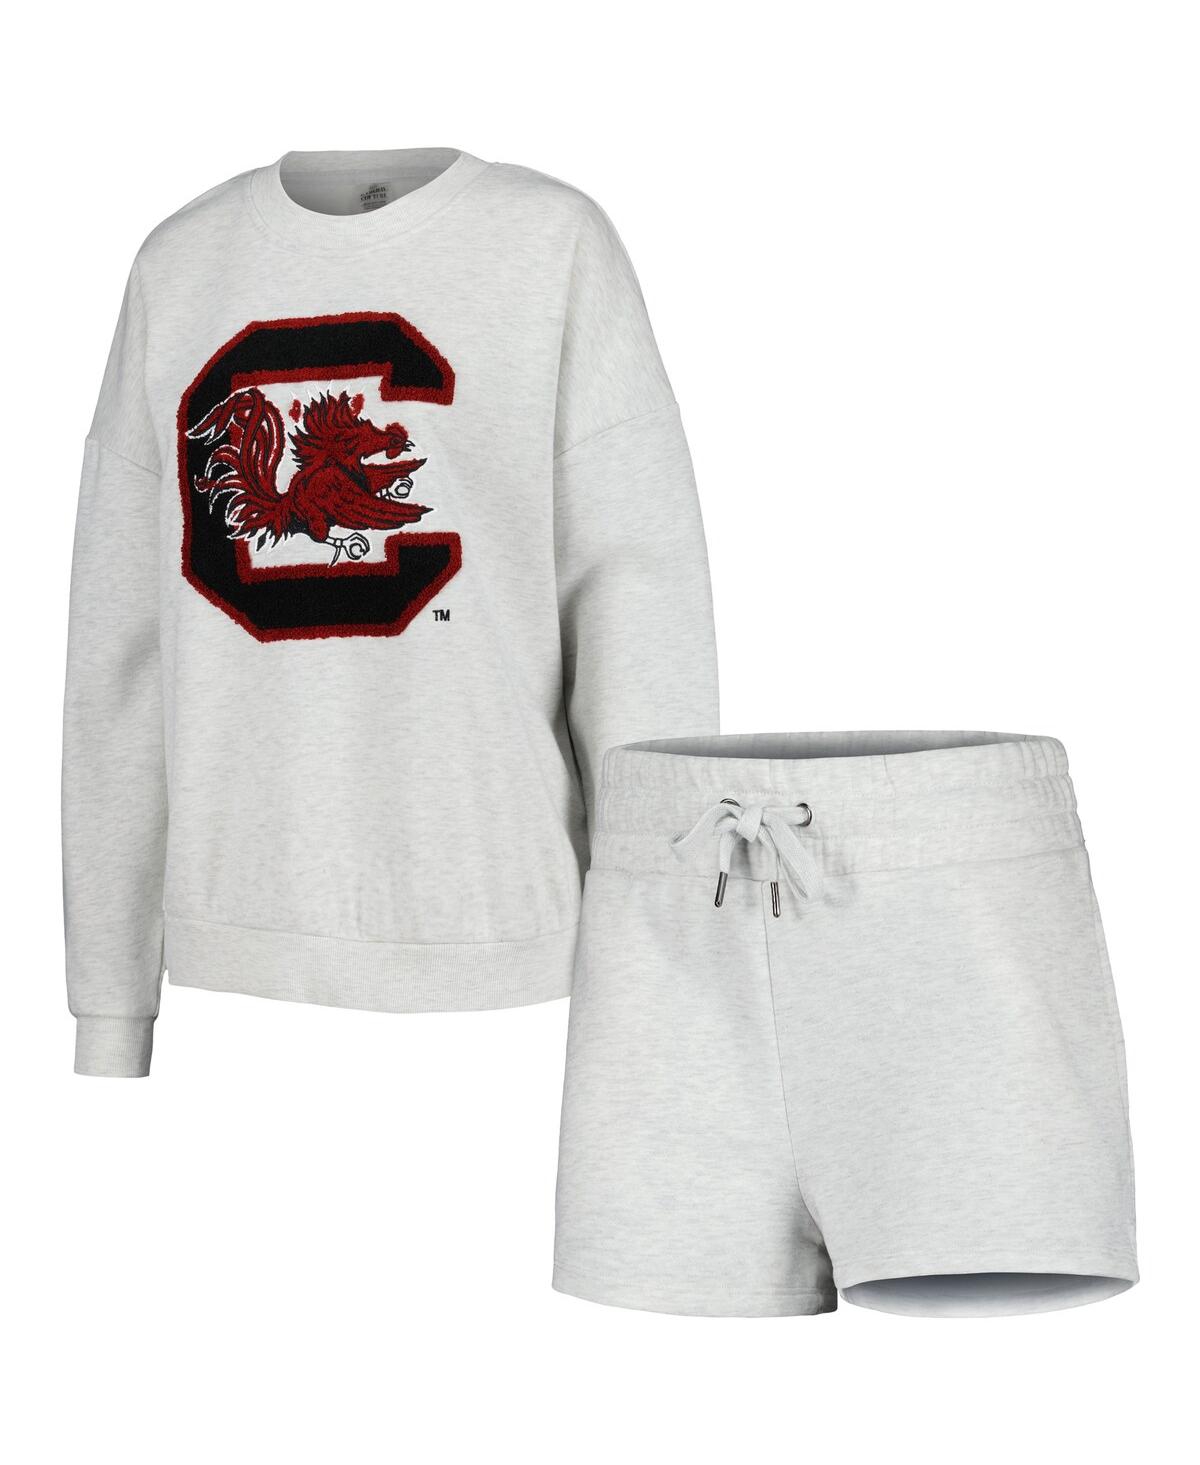 Gameday Couture Women's  Ash South Carolina Gamecocks Team Effort Pullover Sweatshirt And Shorts Slee